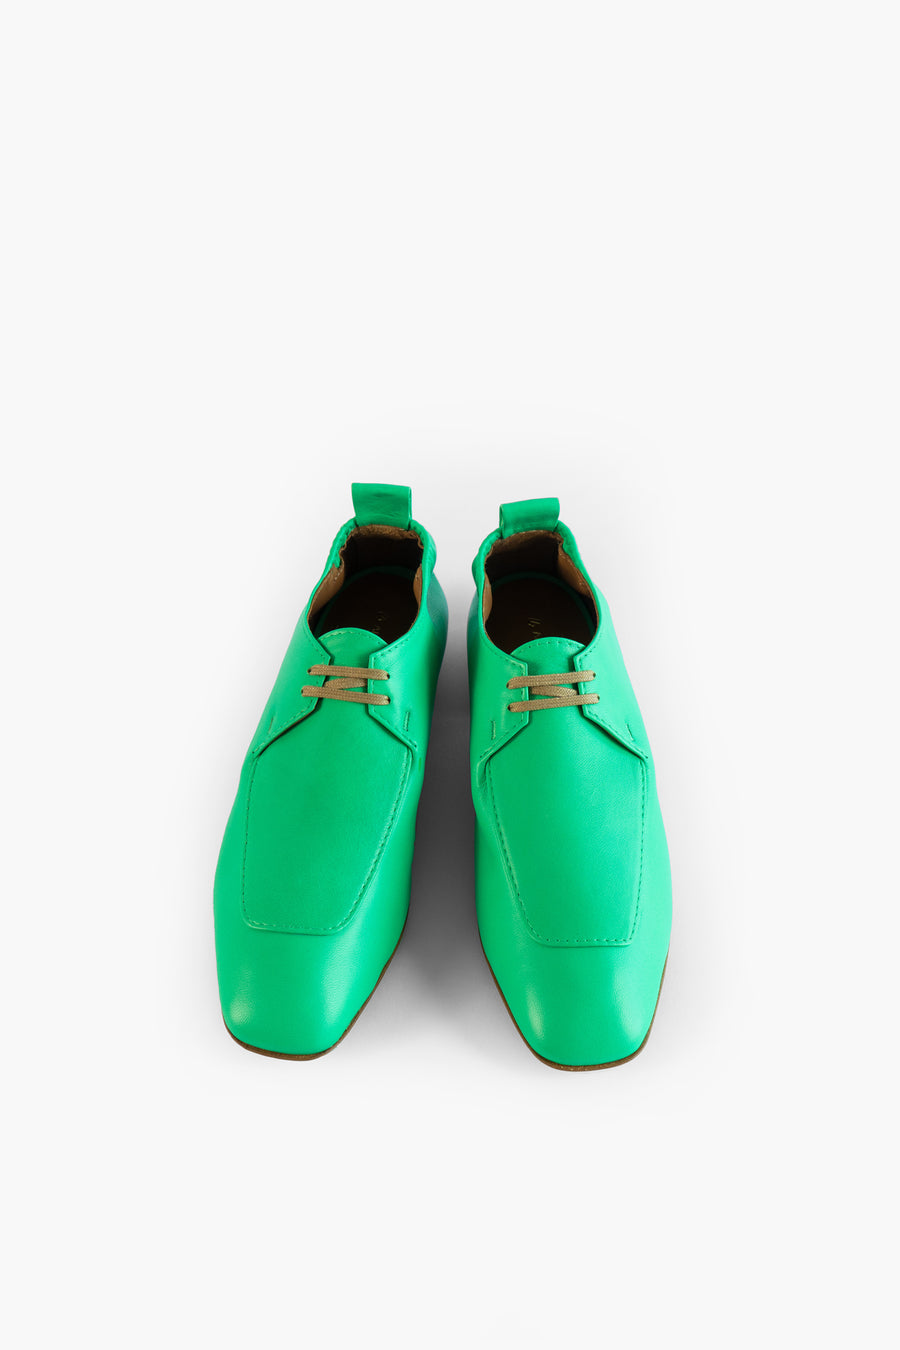 TEDA lace up Shoe | Made in Germany